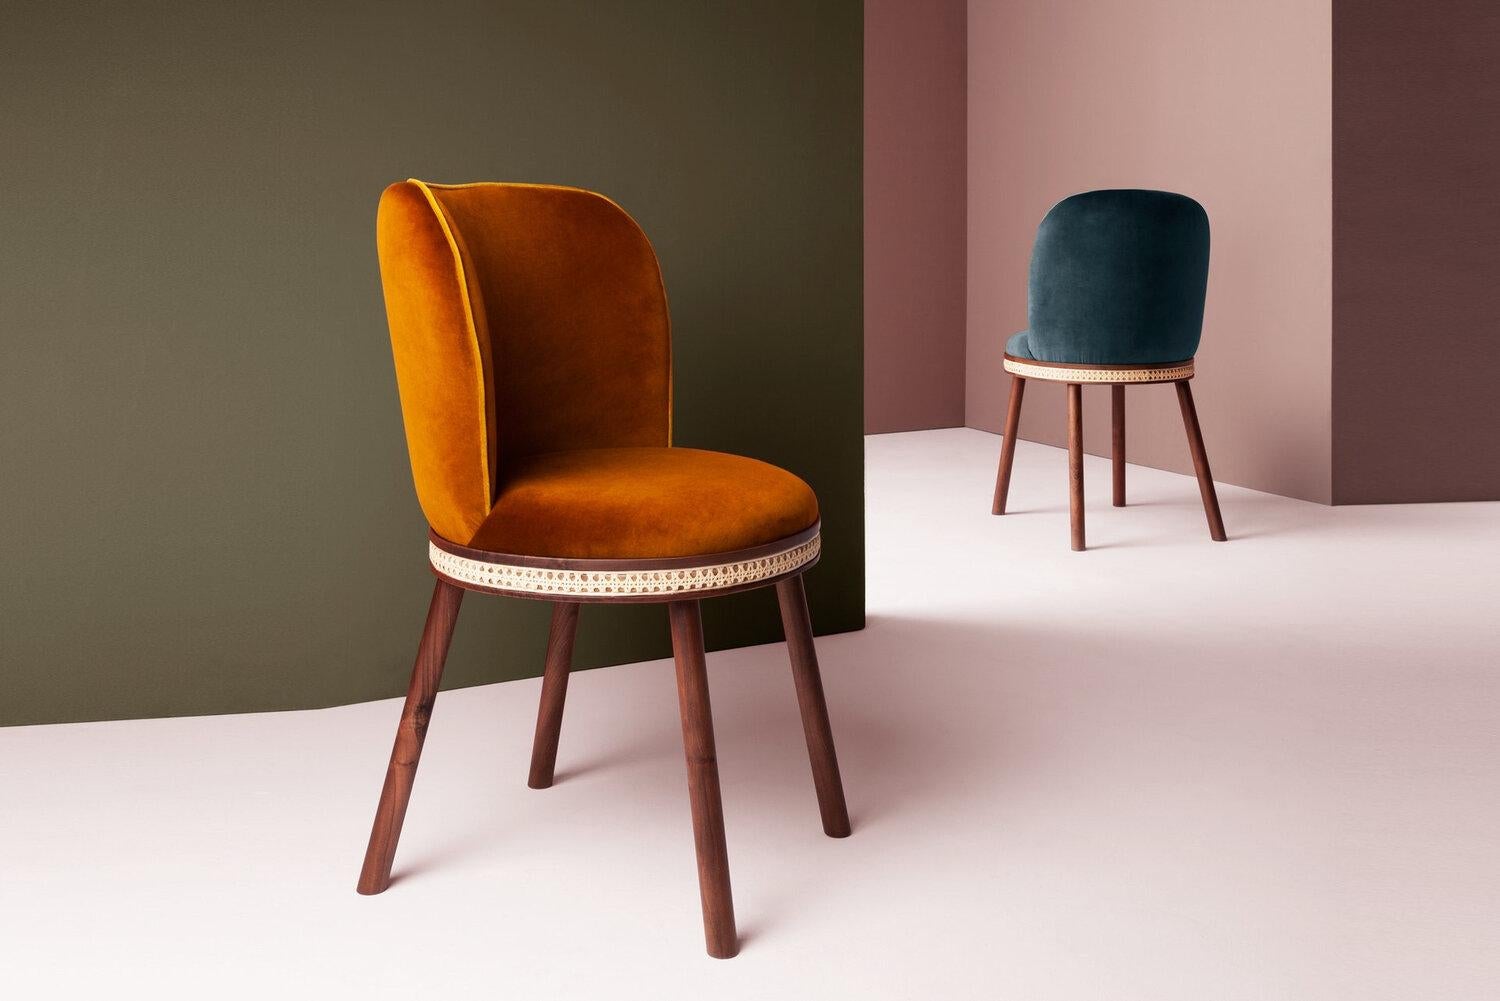 Alma velvet upholstered side chair. As any admirer would experience gazing at its muse, it is impossible not to feel enchanted and almost hypnotized by the refined, sensual lines and the delightfully charming soul of Alma chair. In a piece that